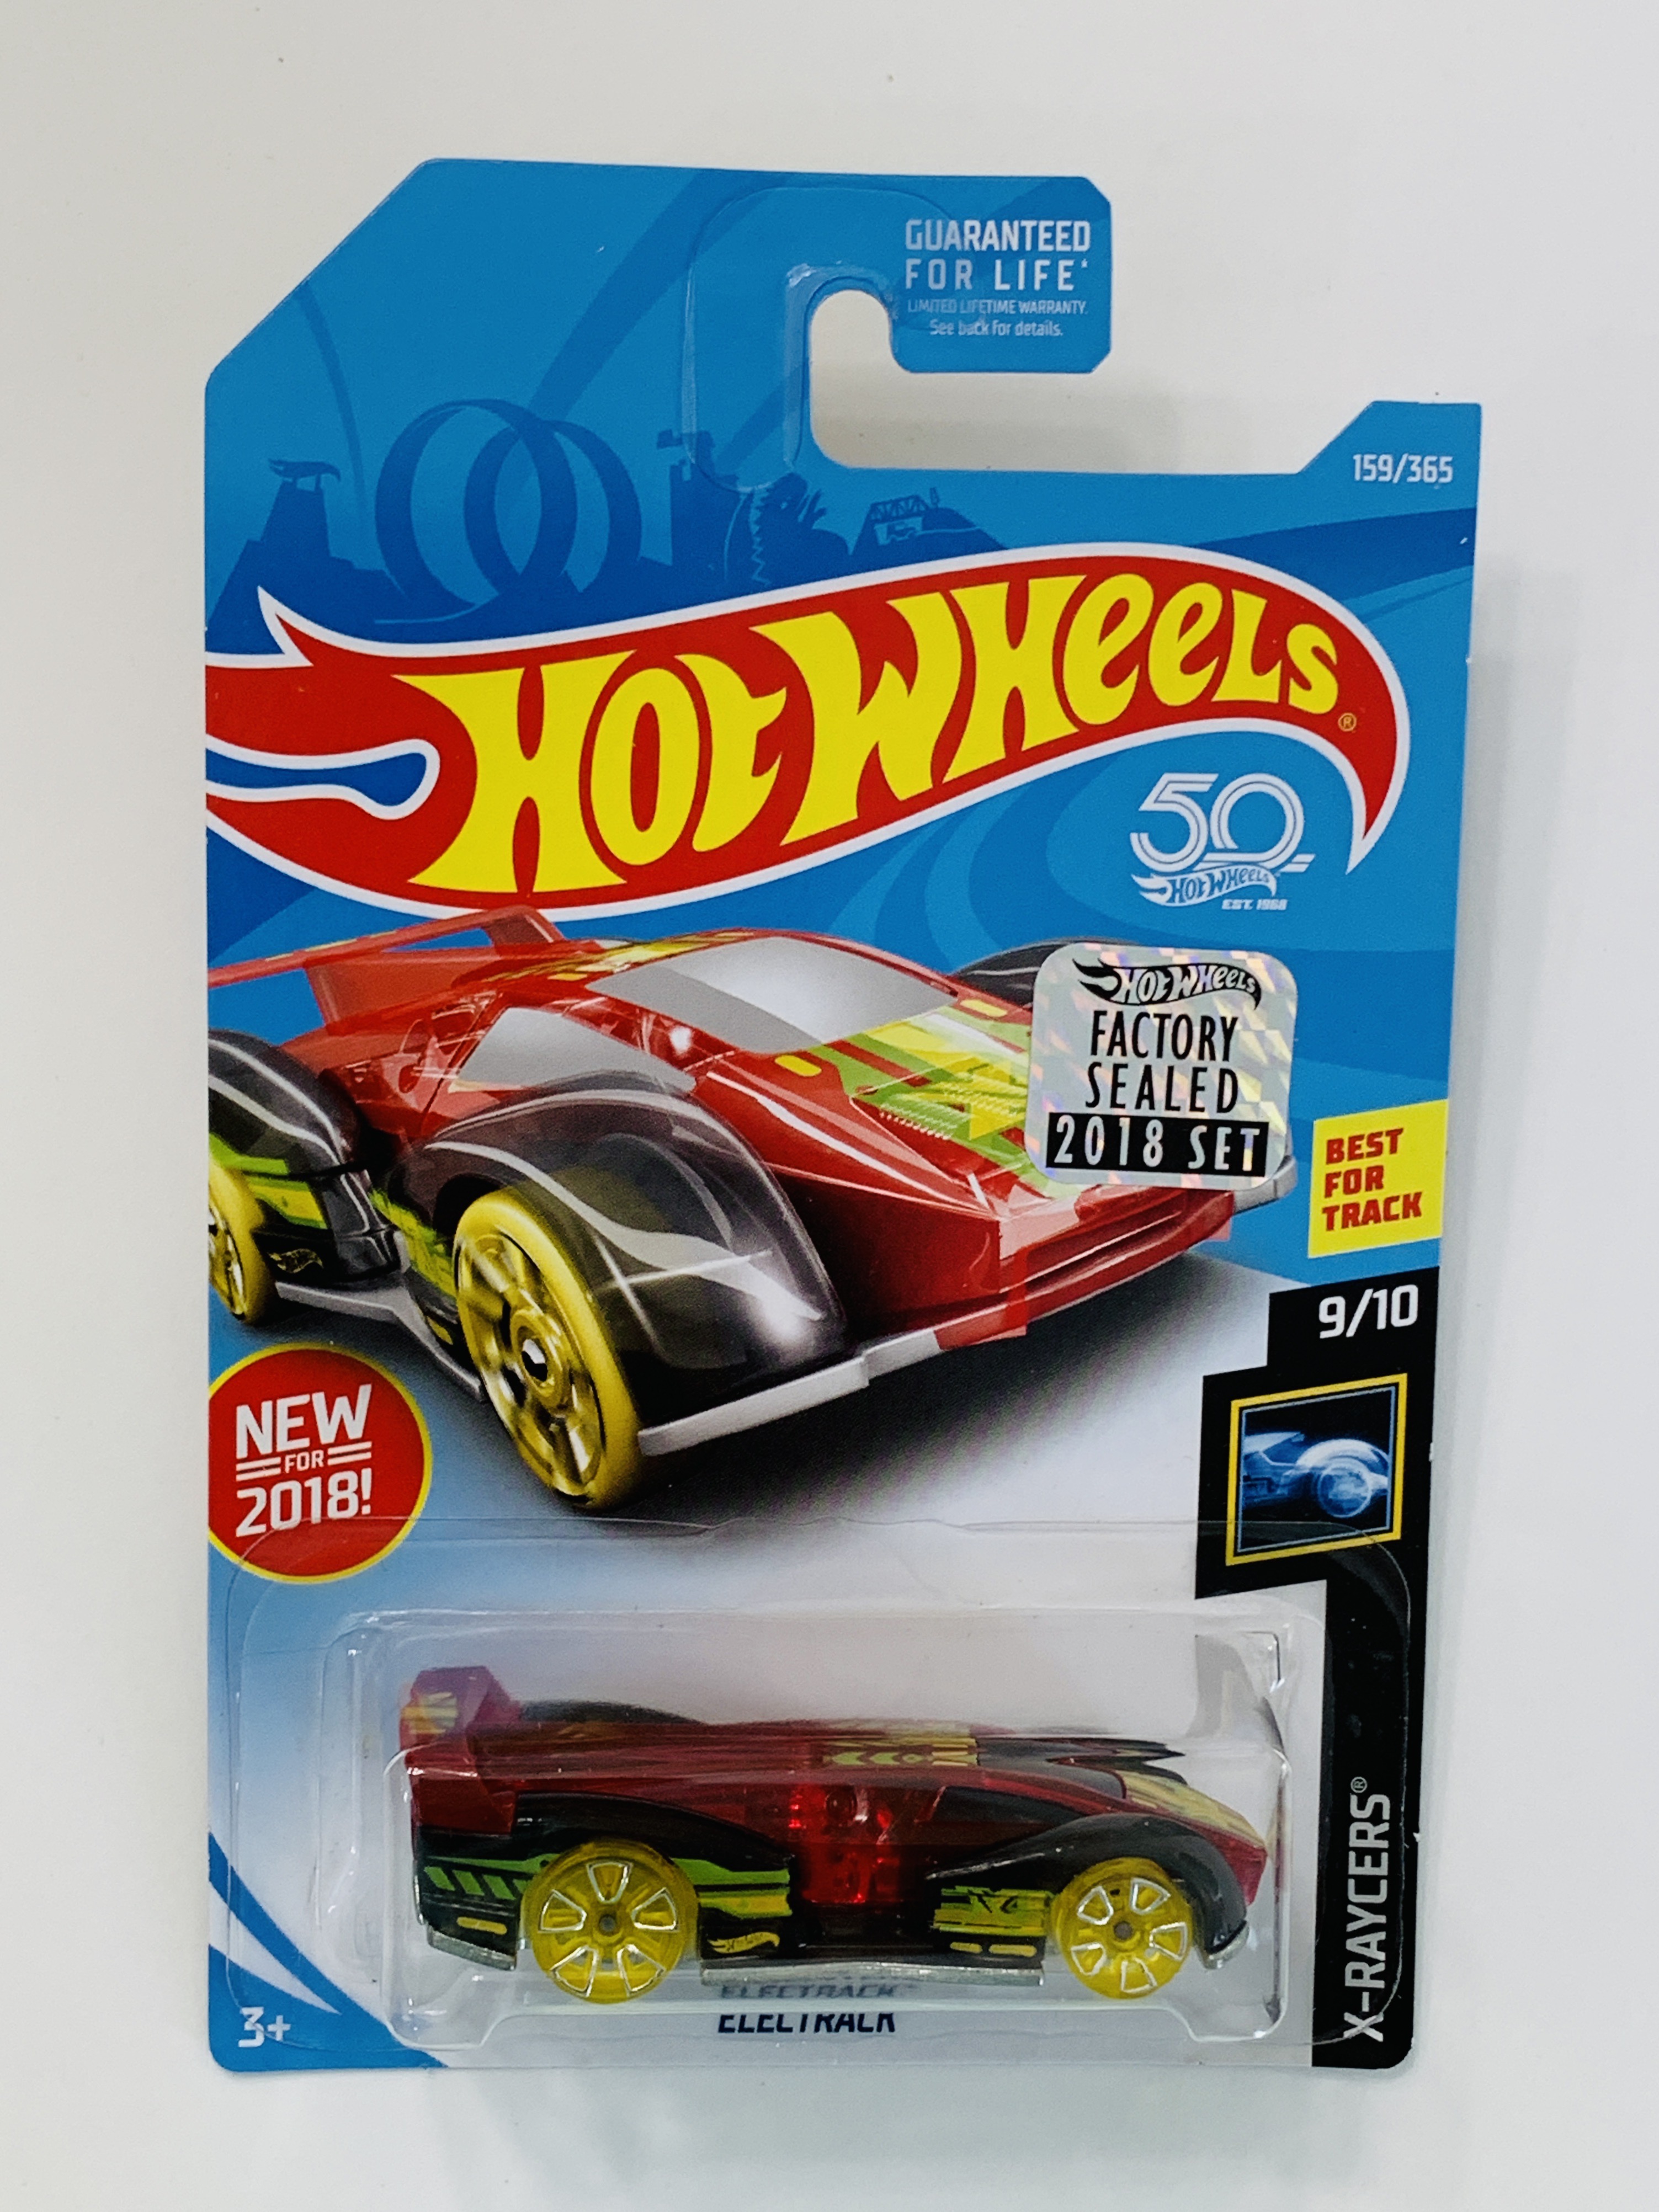 Hot Wheels 2018 Factory Set #159 Electrack - Red